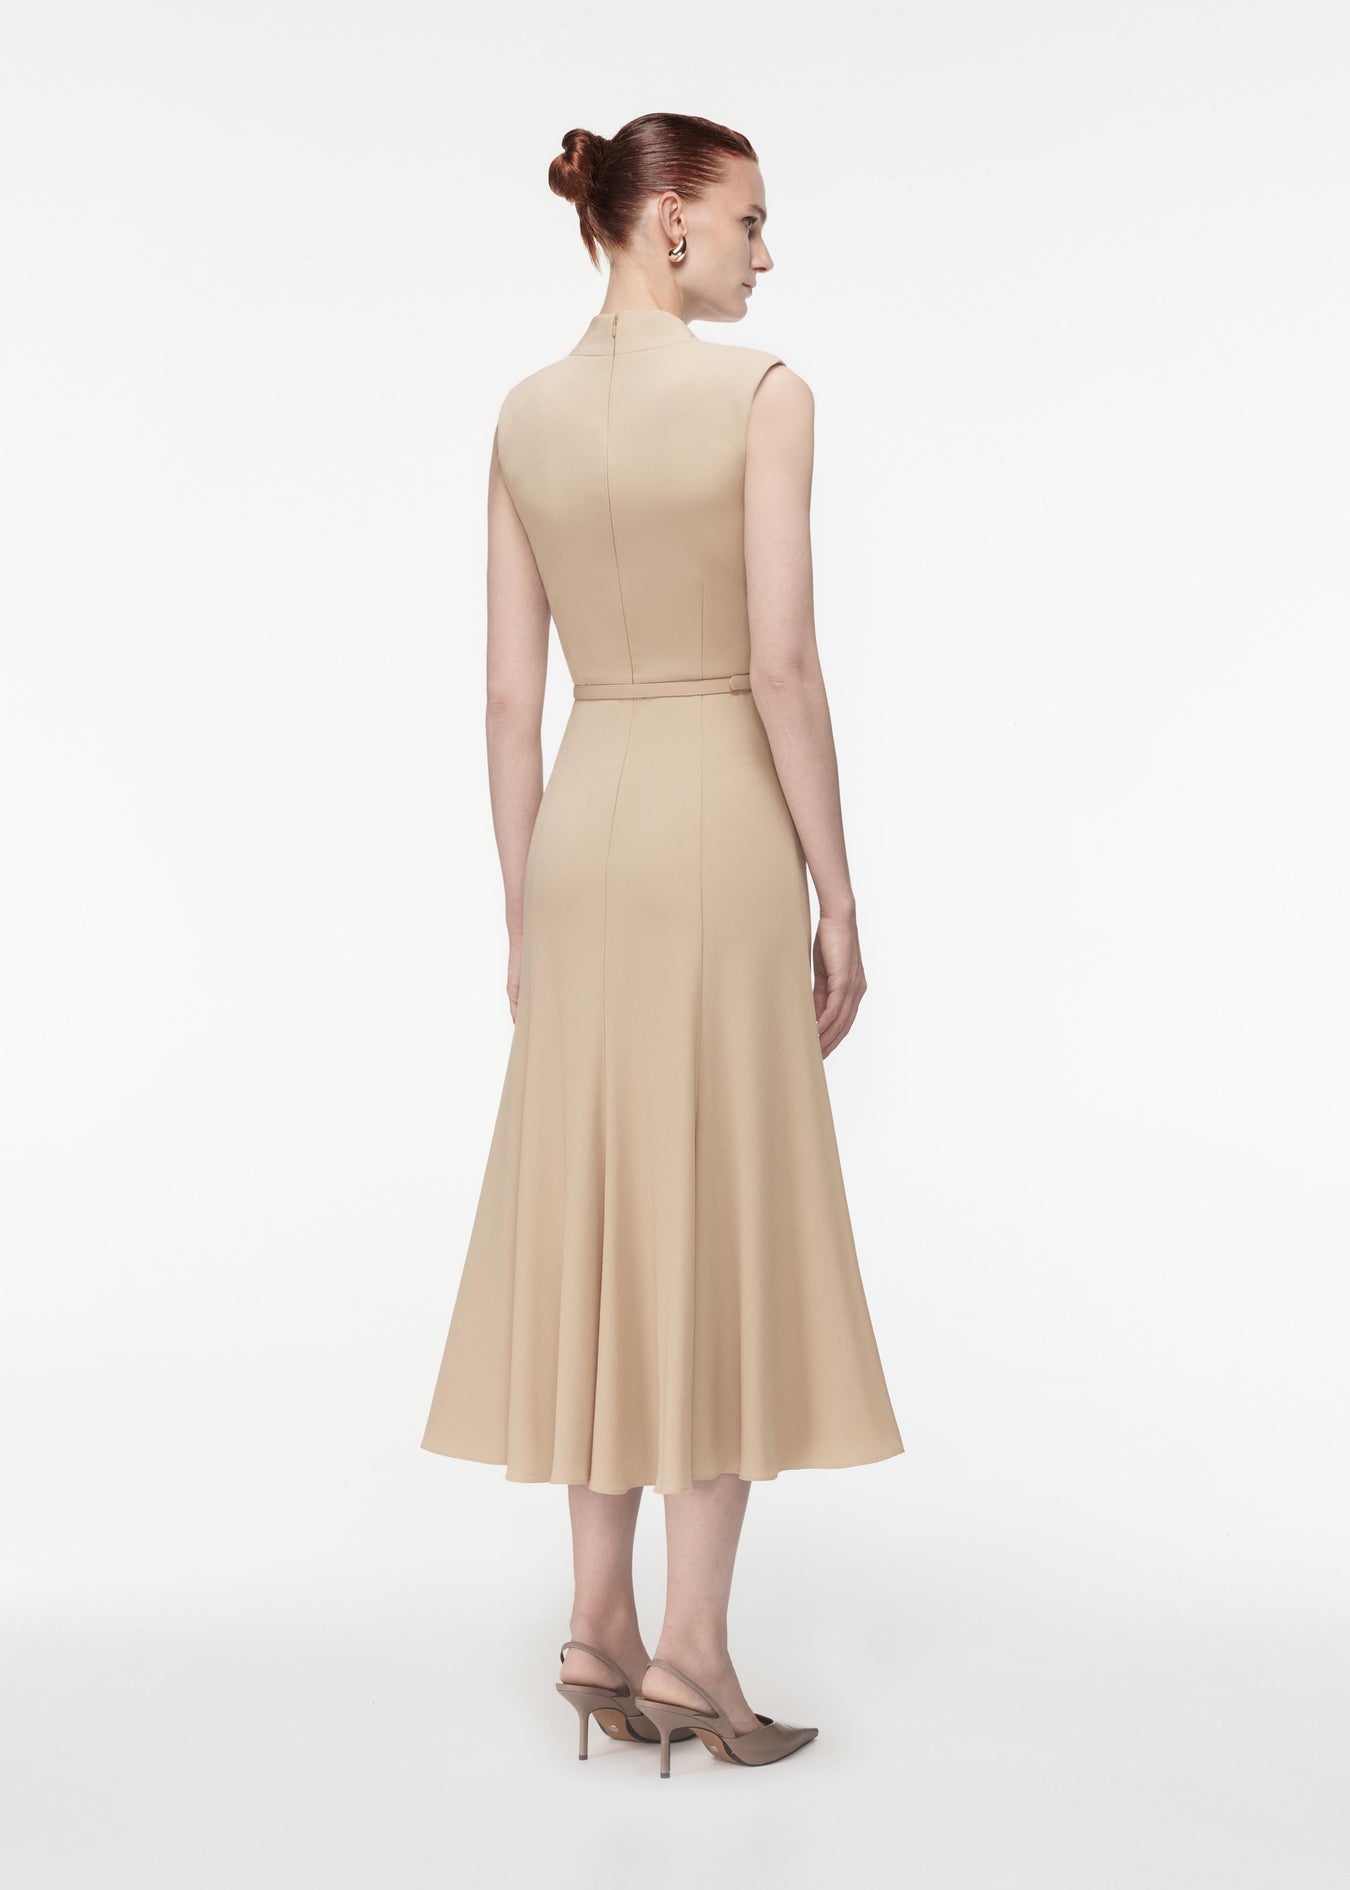 A photograph of a woman wearing a Satin Crepe Midi Dress in Taupe